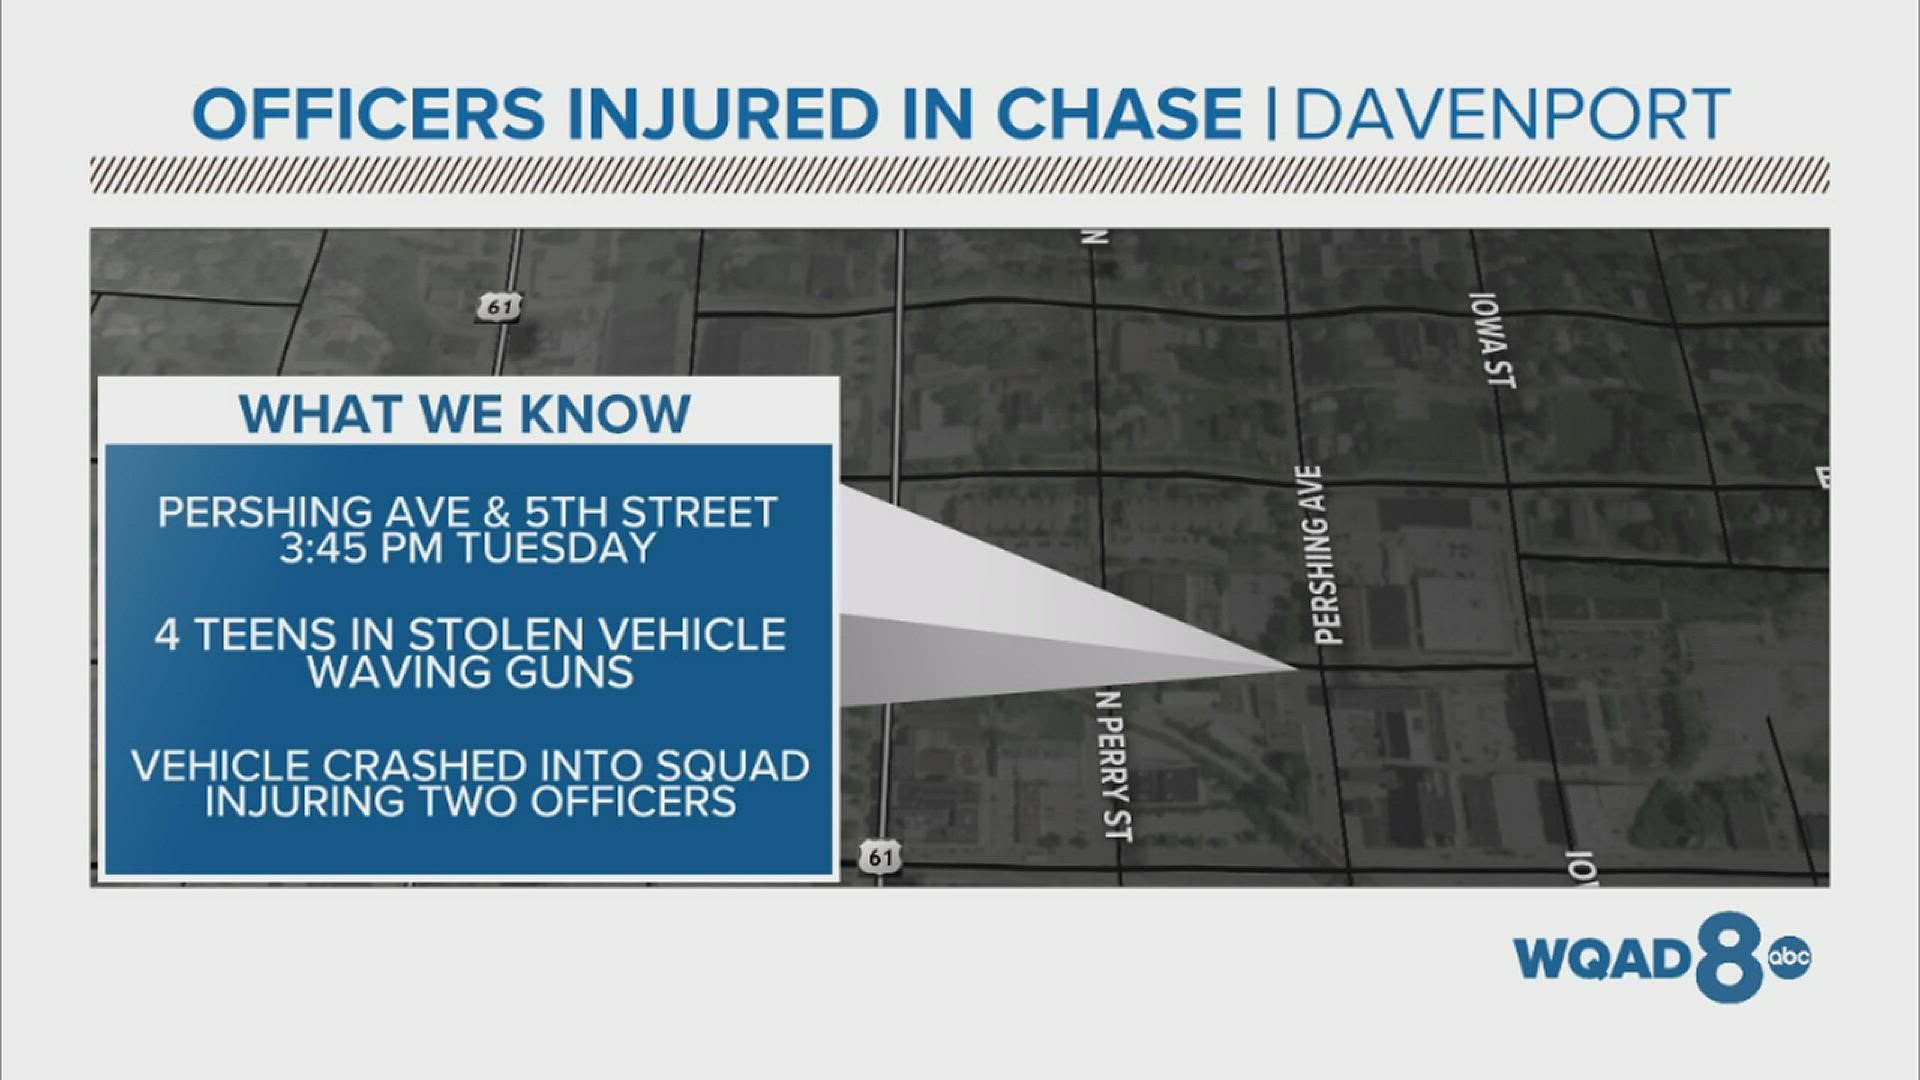 A group of teens driving a stolen car got into a brief chase with Davenport police, which ended when they crashed into a squad car, injuring two officers.